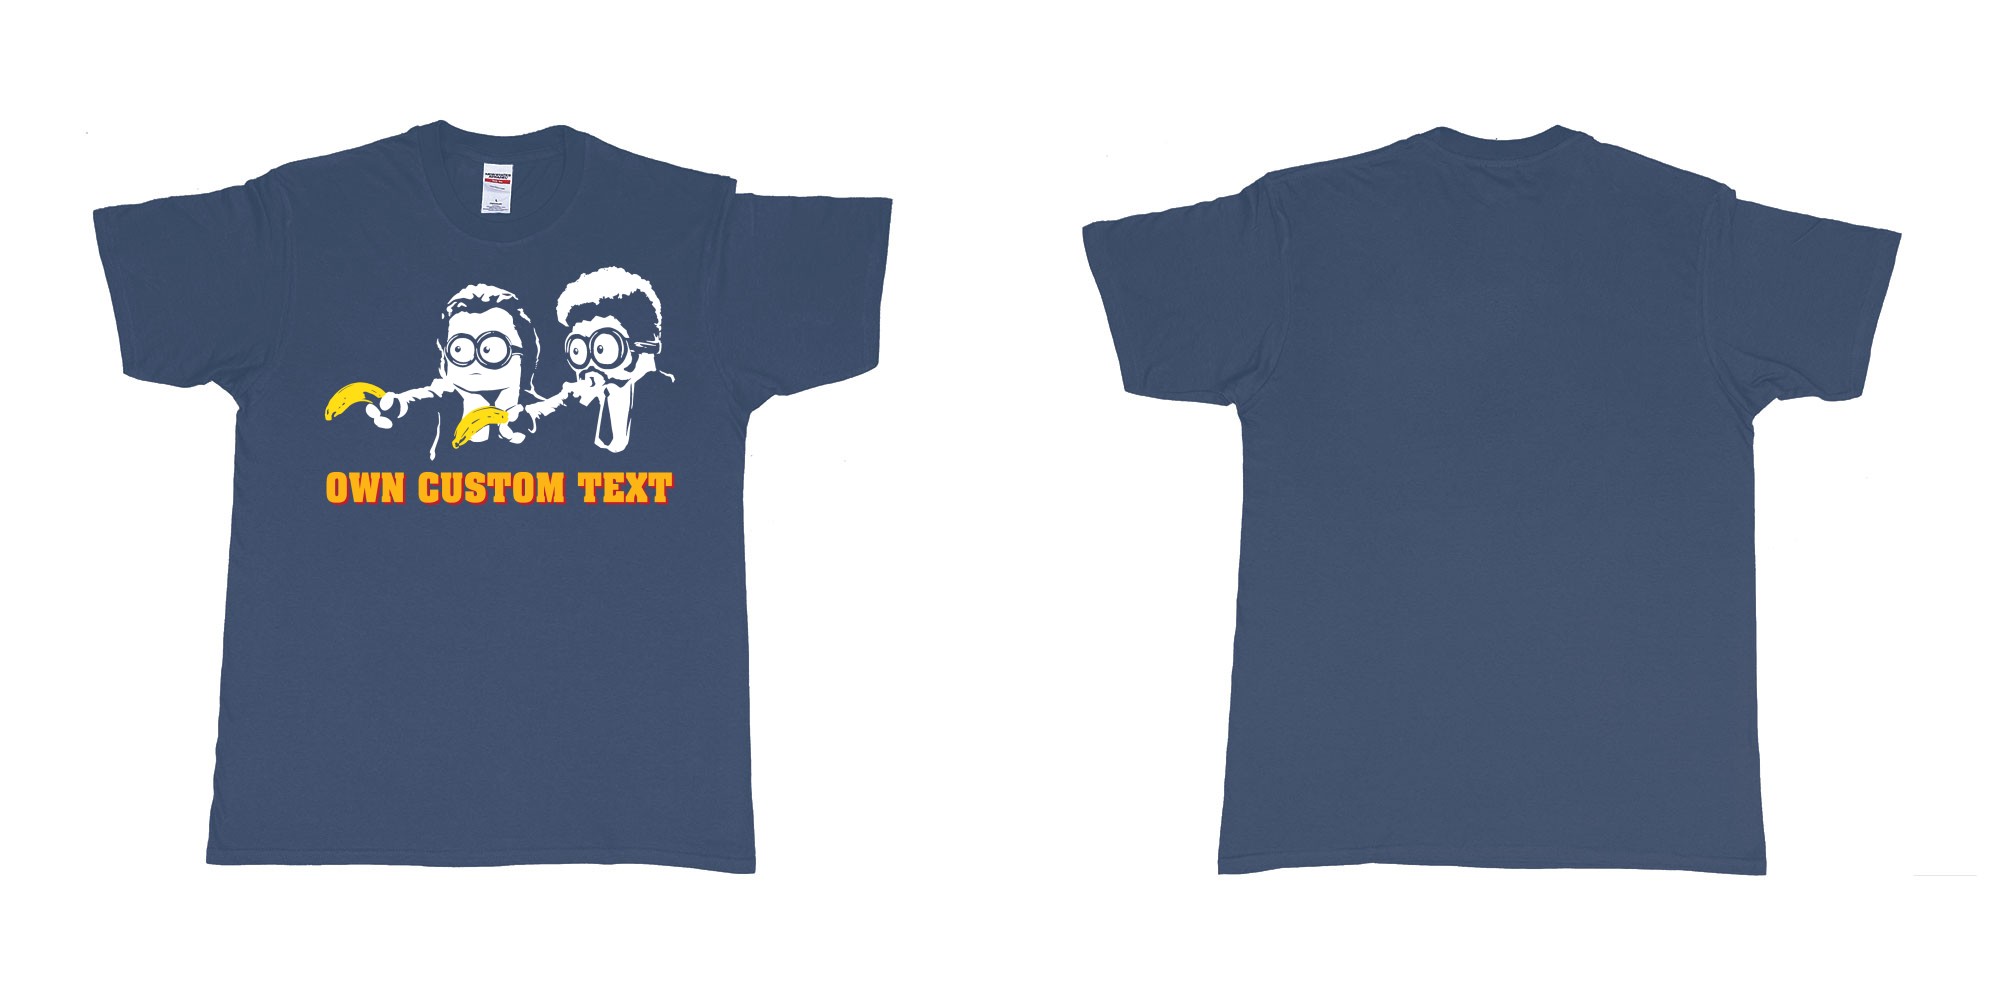 Custom tshirt design minions pulp fiction in fabric color navy choice your own text made in Bali by The Pirate Way